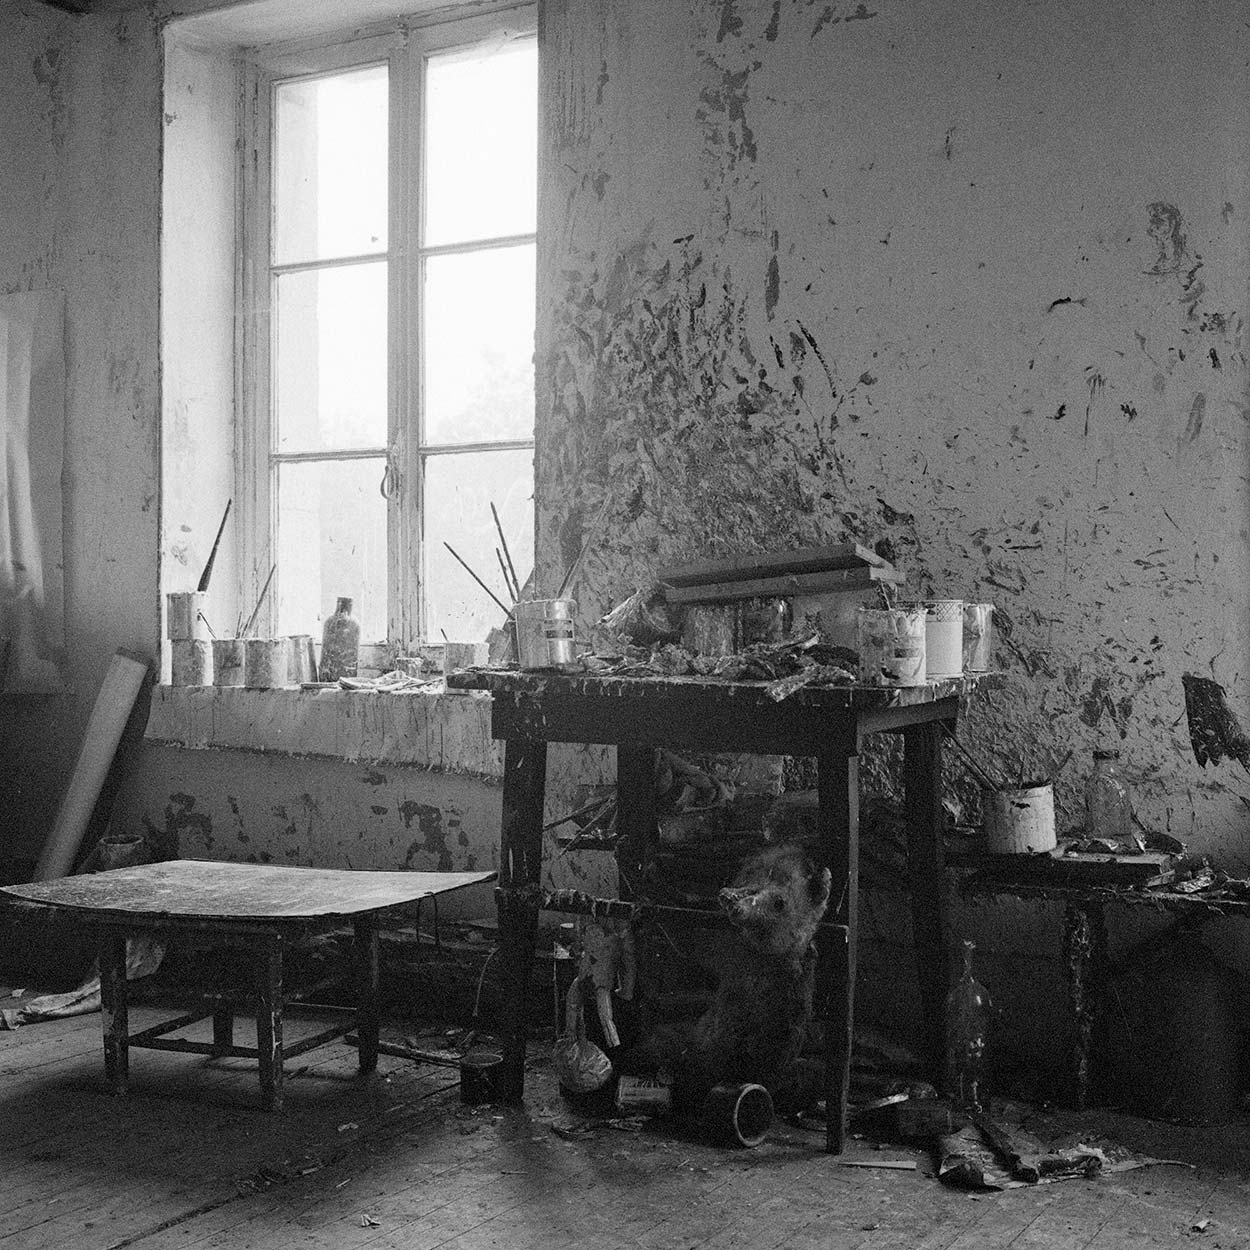 Dado’s studio at Hérouval in the early 1960’s